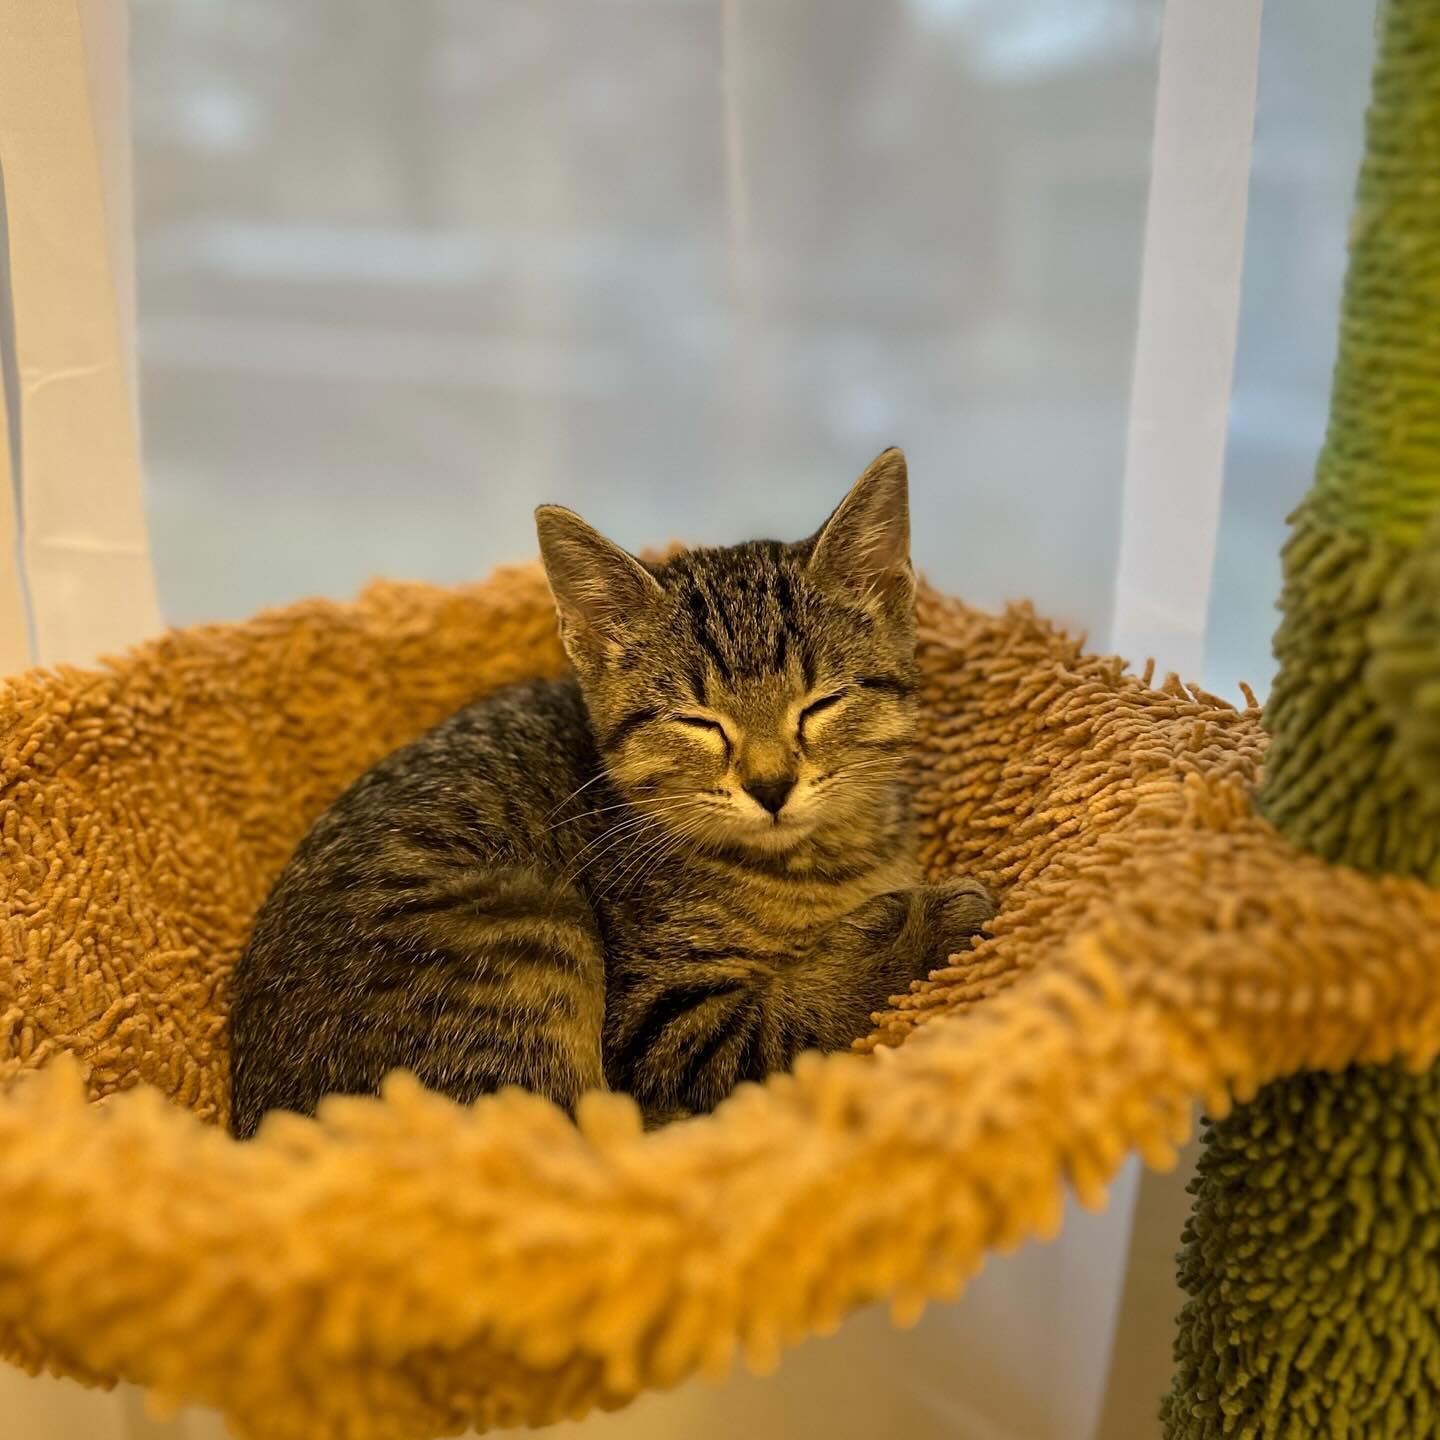 Kittens are coming 😻

Kittens will be taking over @denvercatco starting Saturday! Whether you are looking to adopt, or just hanging out, we recommend making a reservation to ensure you can come play. 

#kitten #kittenweekend #mothersday #kitty #cat 